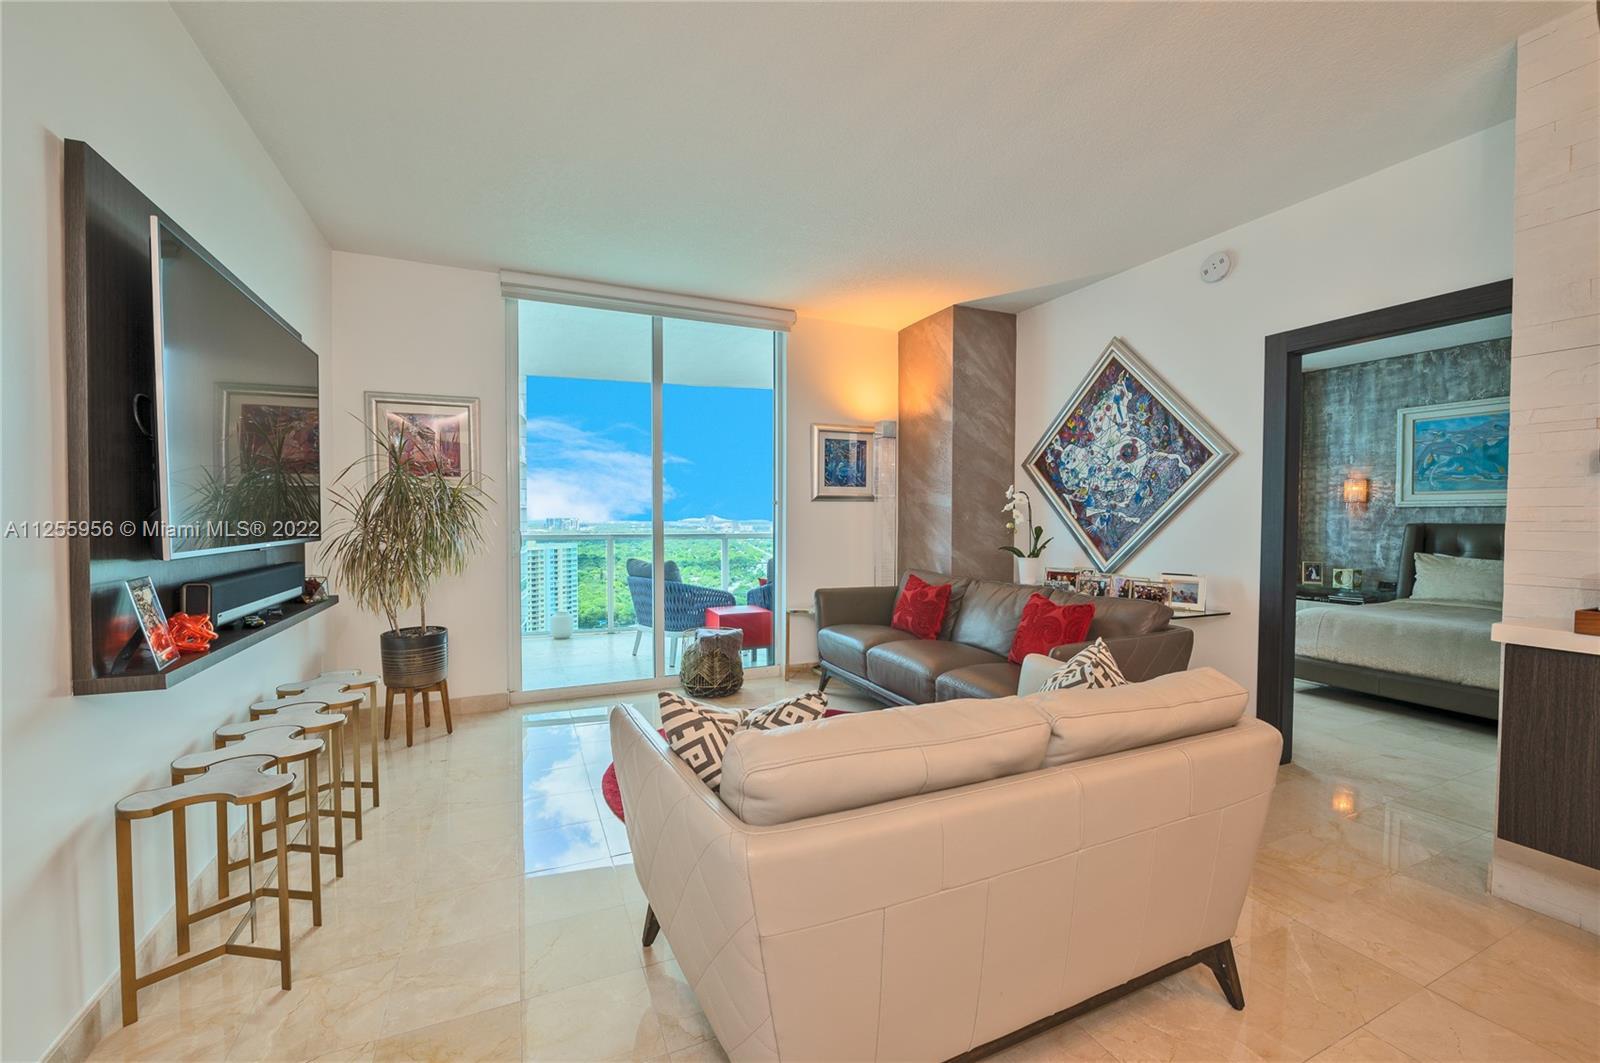 ENTER THIS FABULOUS STATE-OF-THE-ART RESIDENCE SHOWCASING THE BEST BAY AND OCEAN VIEWS IN BRICKELL! 